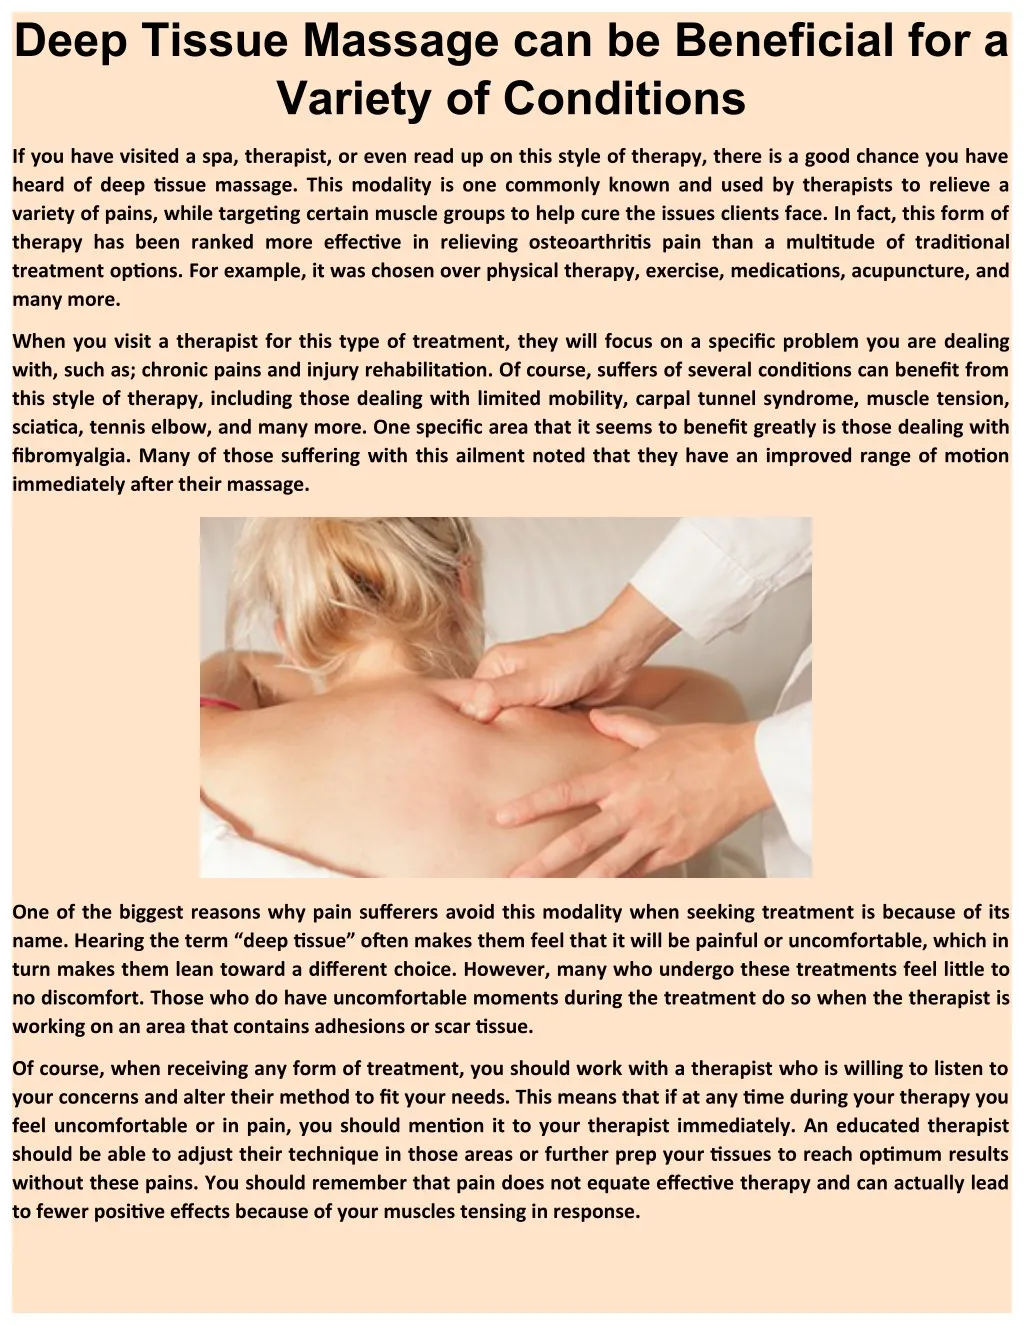 deep tissue massage can be beneficial